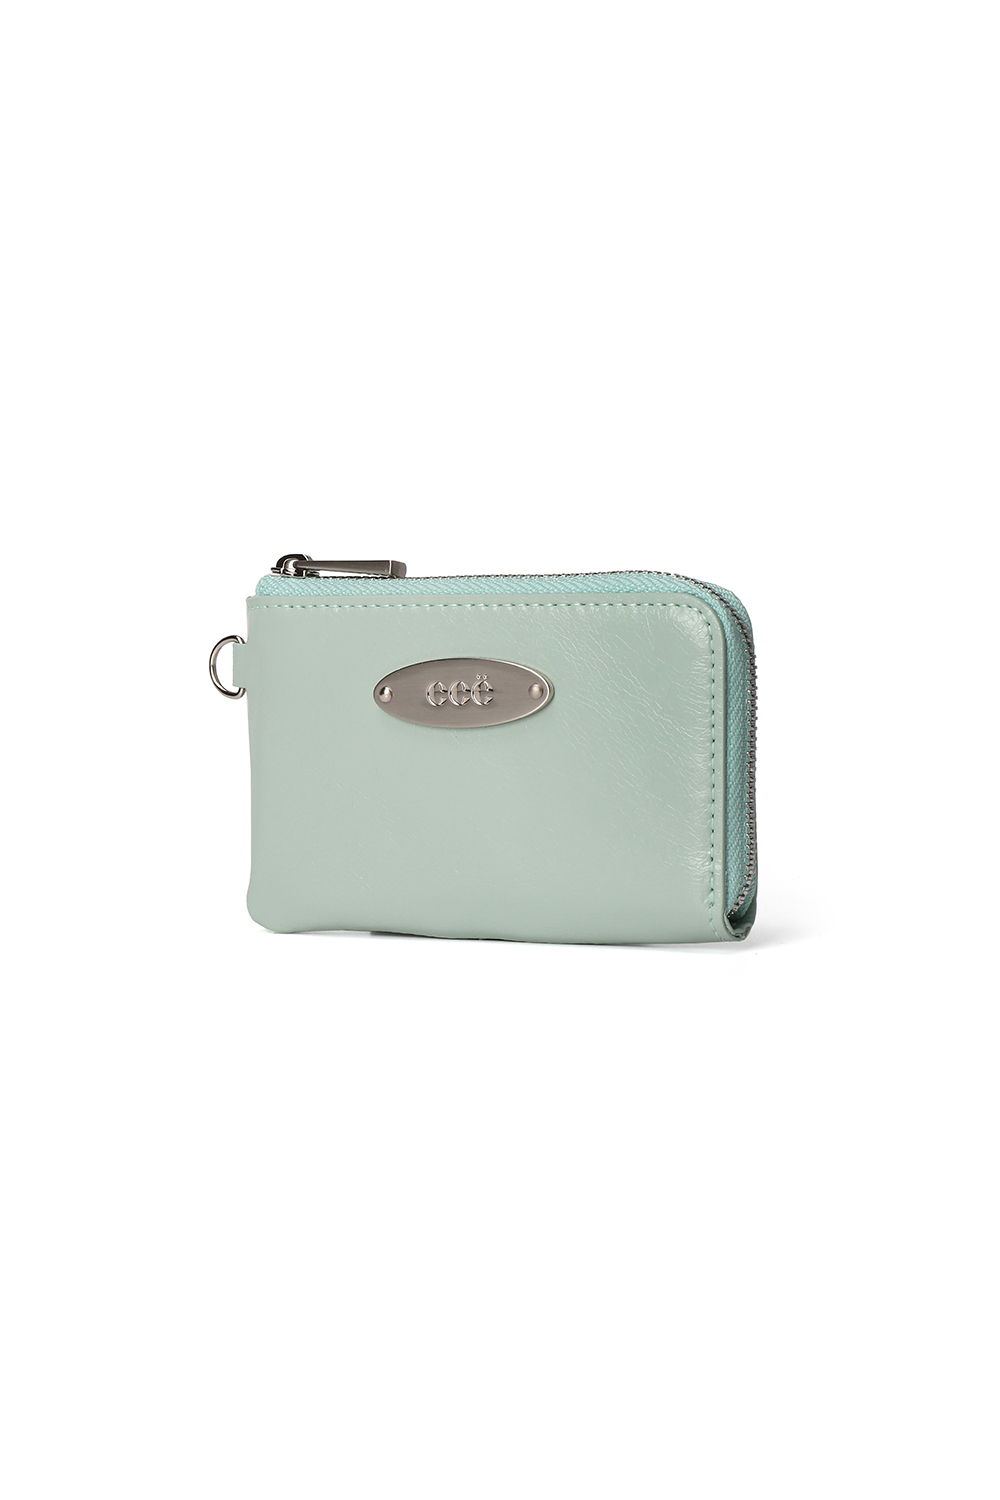 CHACHA CHAIN WALLET [MINT]